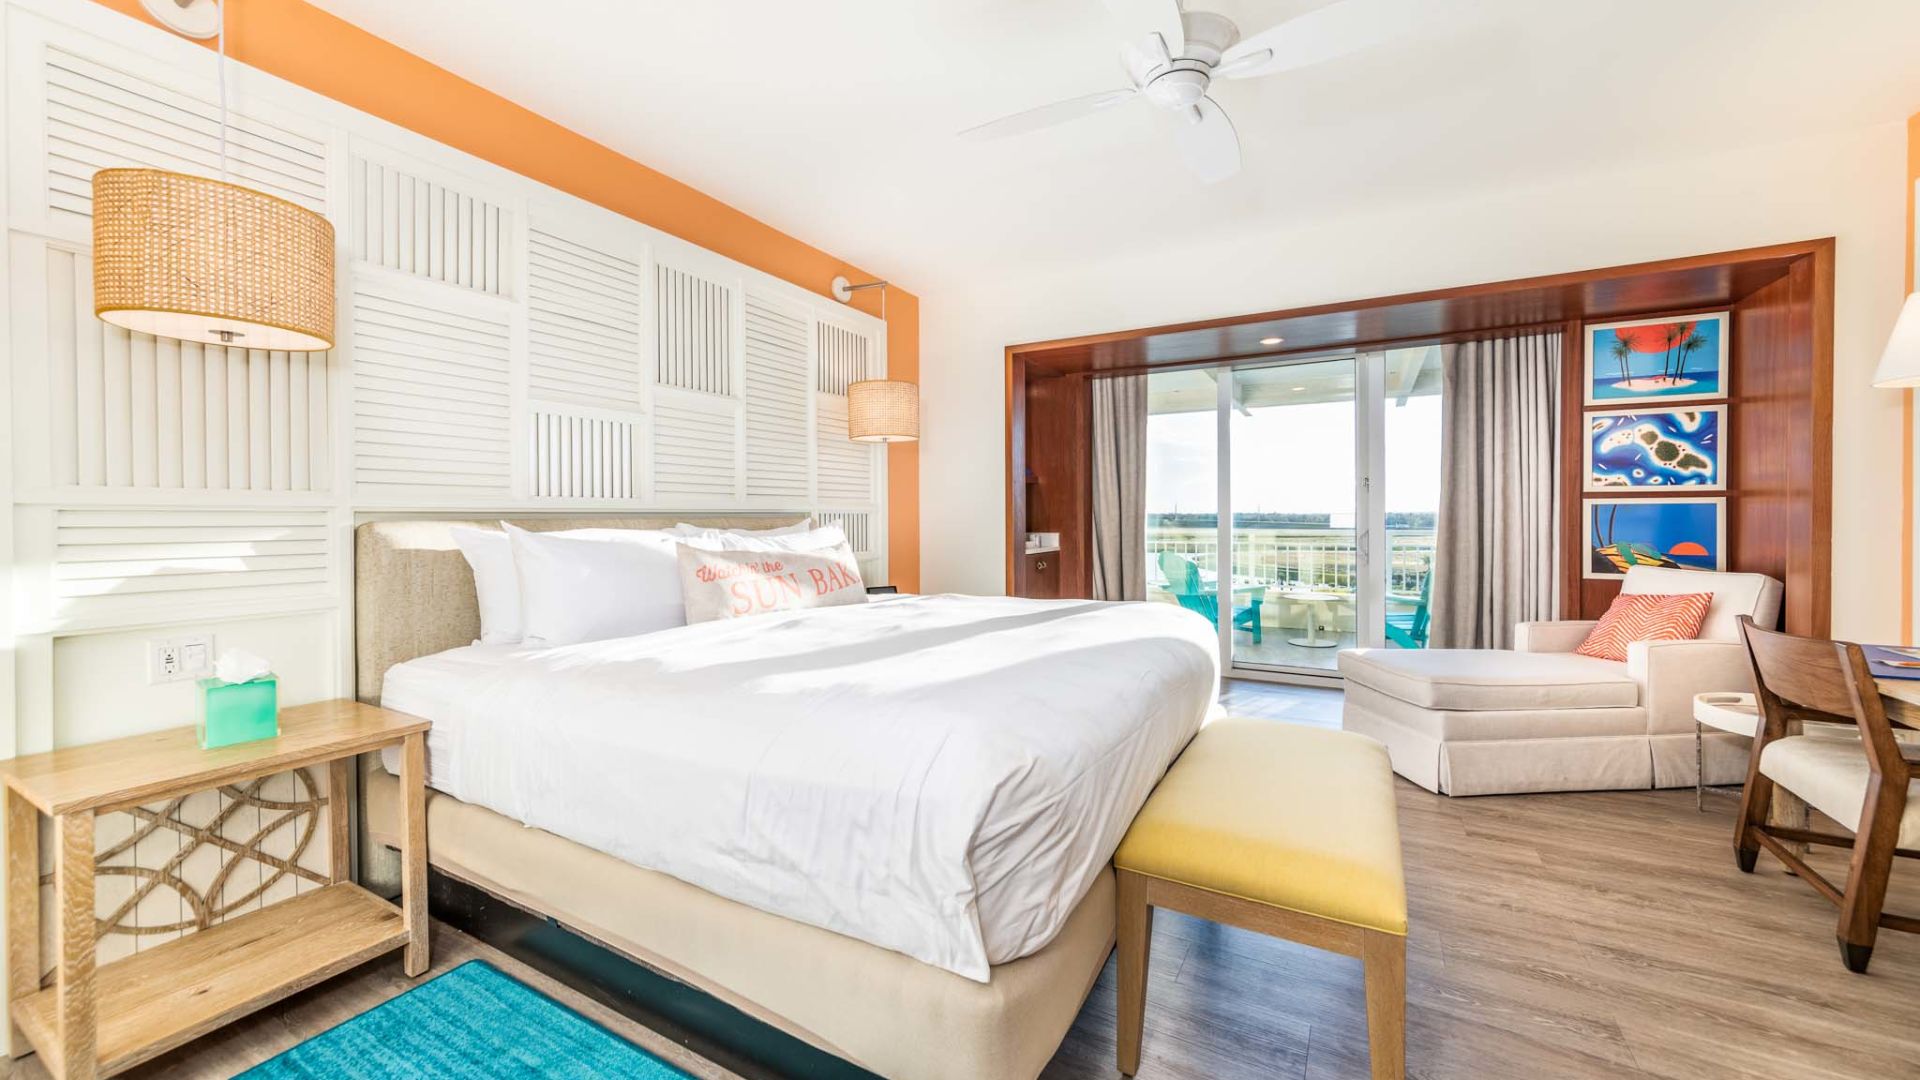 Premium king bedroom at Margaritaville Resort Orlando with large king bed, 1-seater sofa, and balcony access.